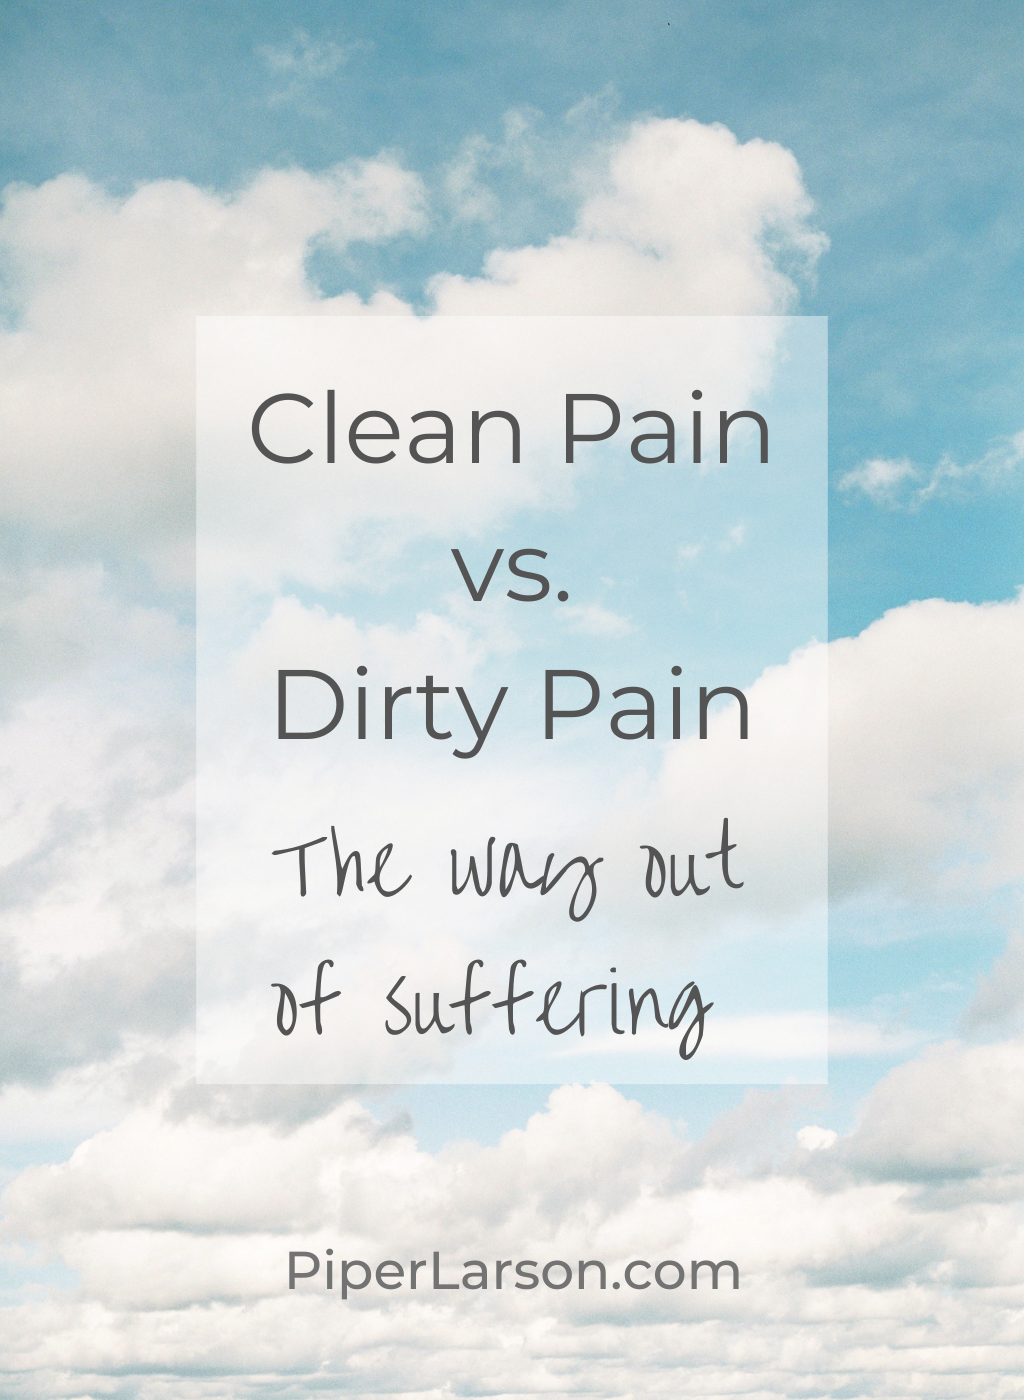 Fluffy white clouds in blue sky. Words: Clean pain vs. dirty pain. The way out of suffering